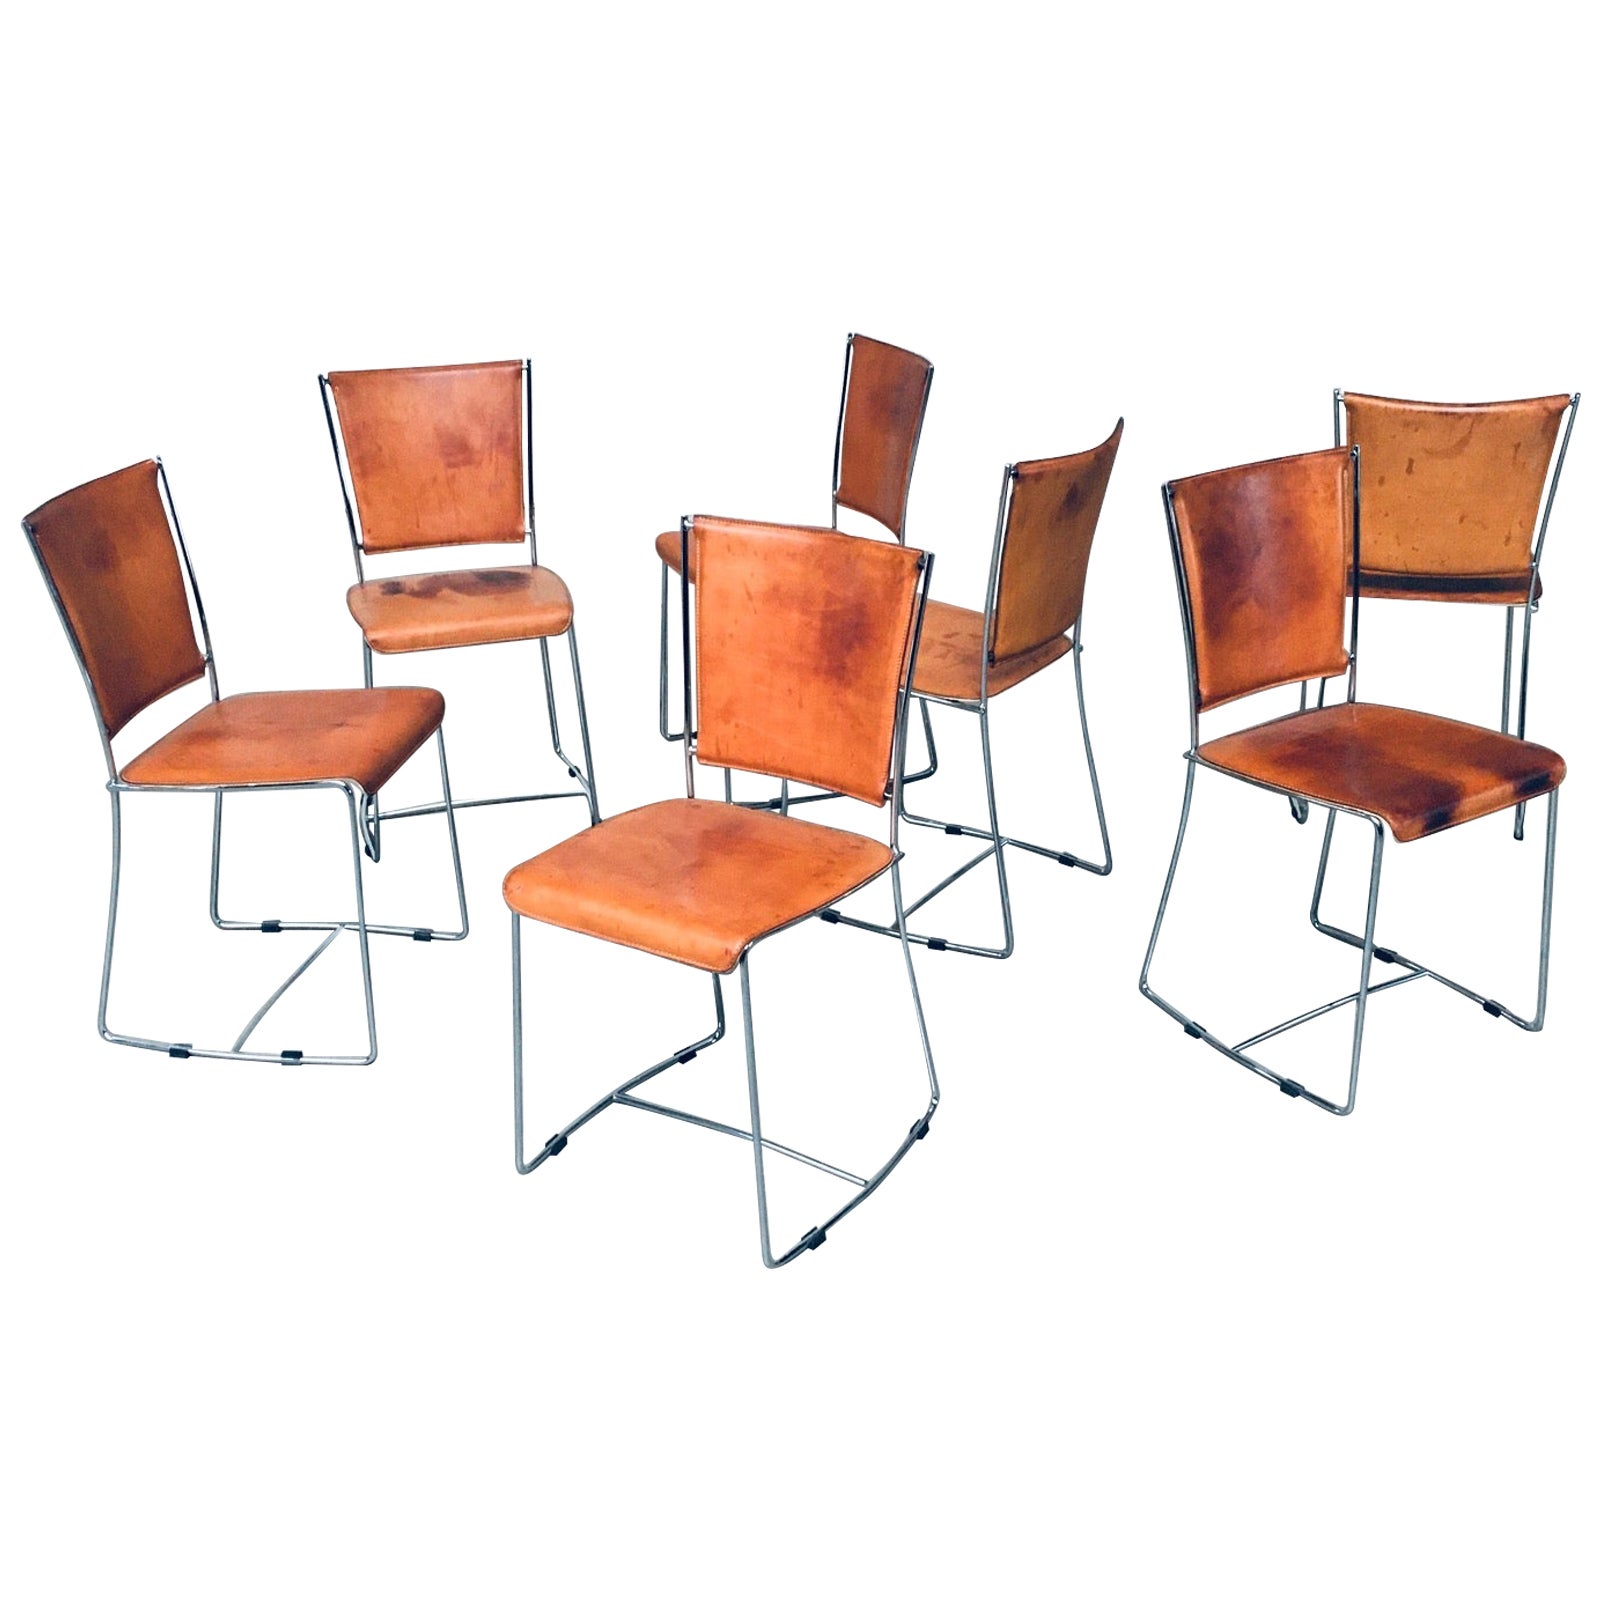 Postmodern Italian Design Leather Dining Chair Set by Segis, Italy, 1990's For Sale